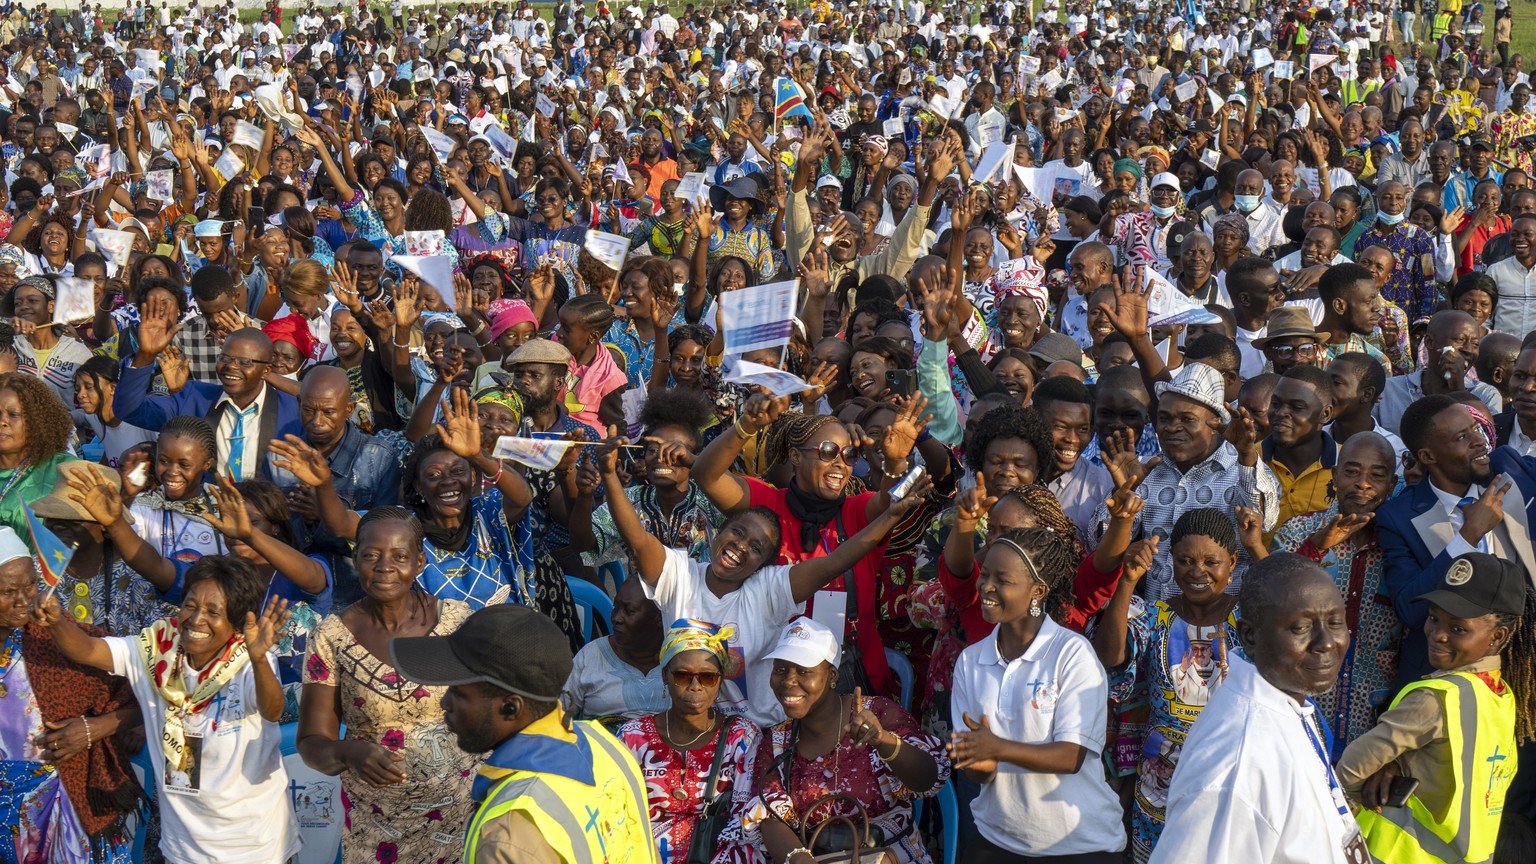 Worshippers gather at Ndolo airport for a Holy Mass with Pope Francis in Kinshasa, Congo, Wednesday, Feb. 1, 2023. Francis is in Congo and South Sudan for a six-day trip, hoping to bring comfort and e ...